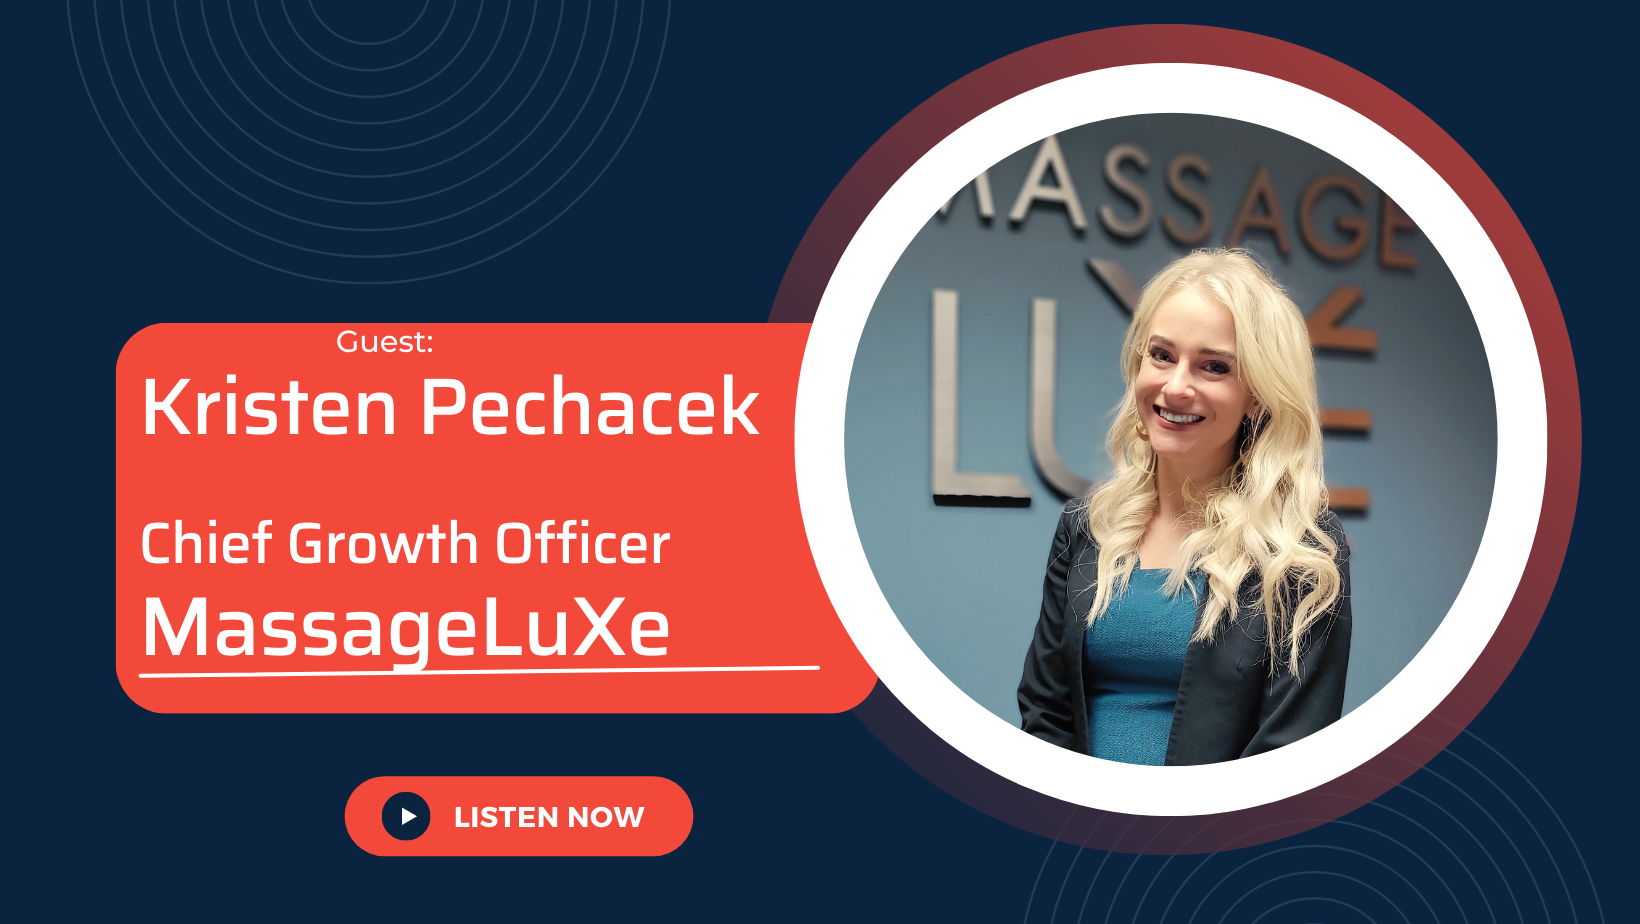 Simple & Successful Marketing Tips with the Chief Growth Officer of MassageLuXe, Kristen Pechacek